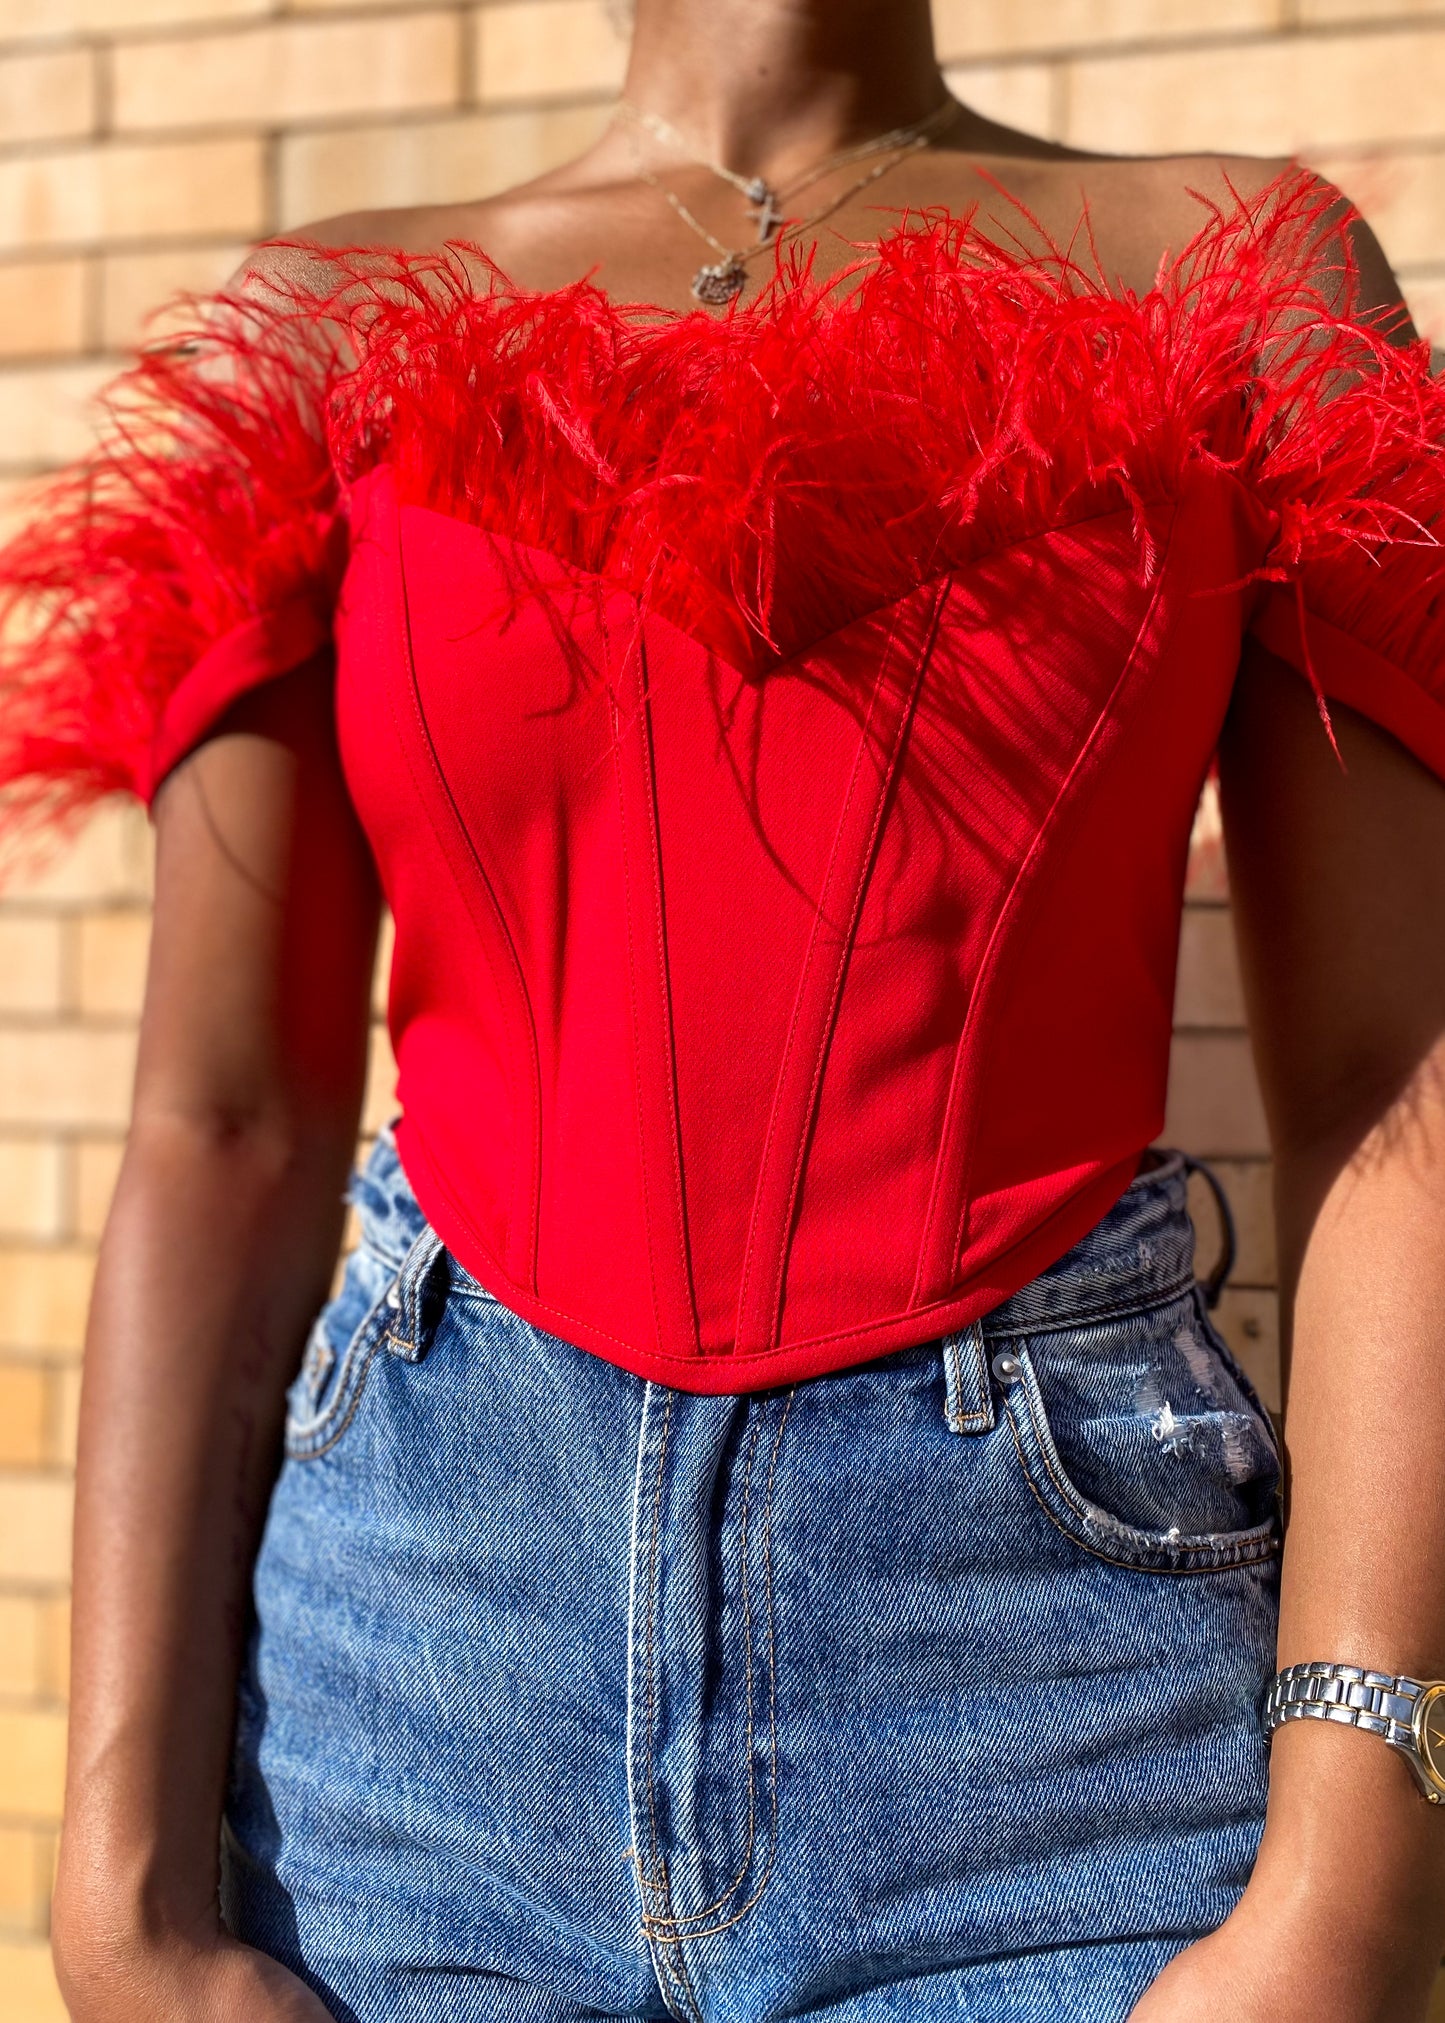 Scarlet Feather Bustier